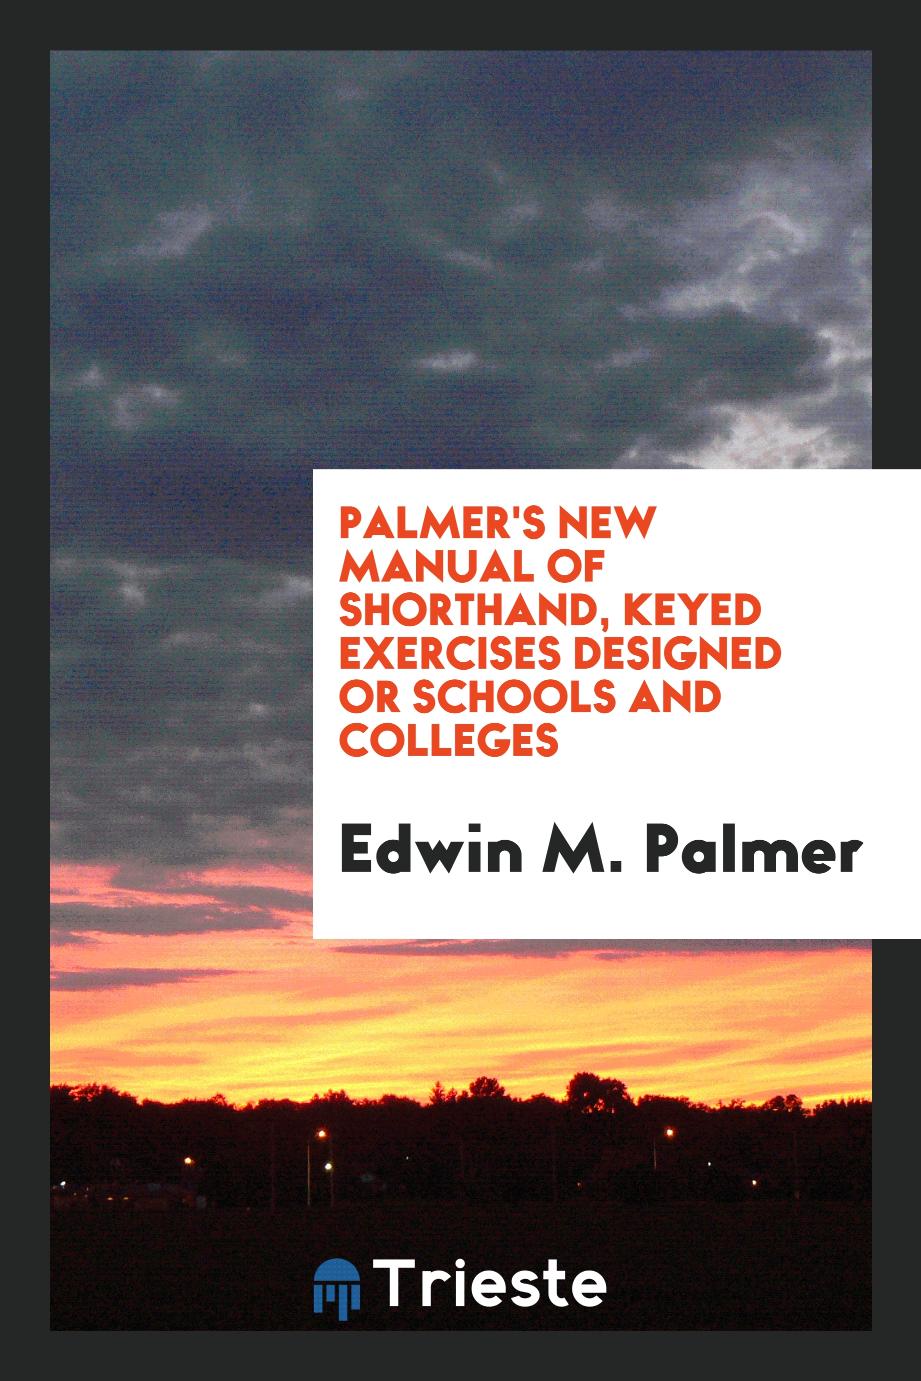 Palmer's New Manual of Shorthand, Keyed Exercises Designed or Schools and Colleges